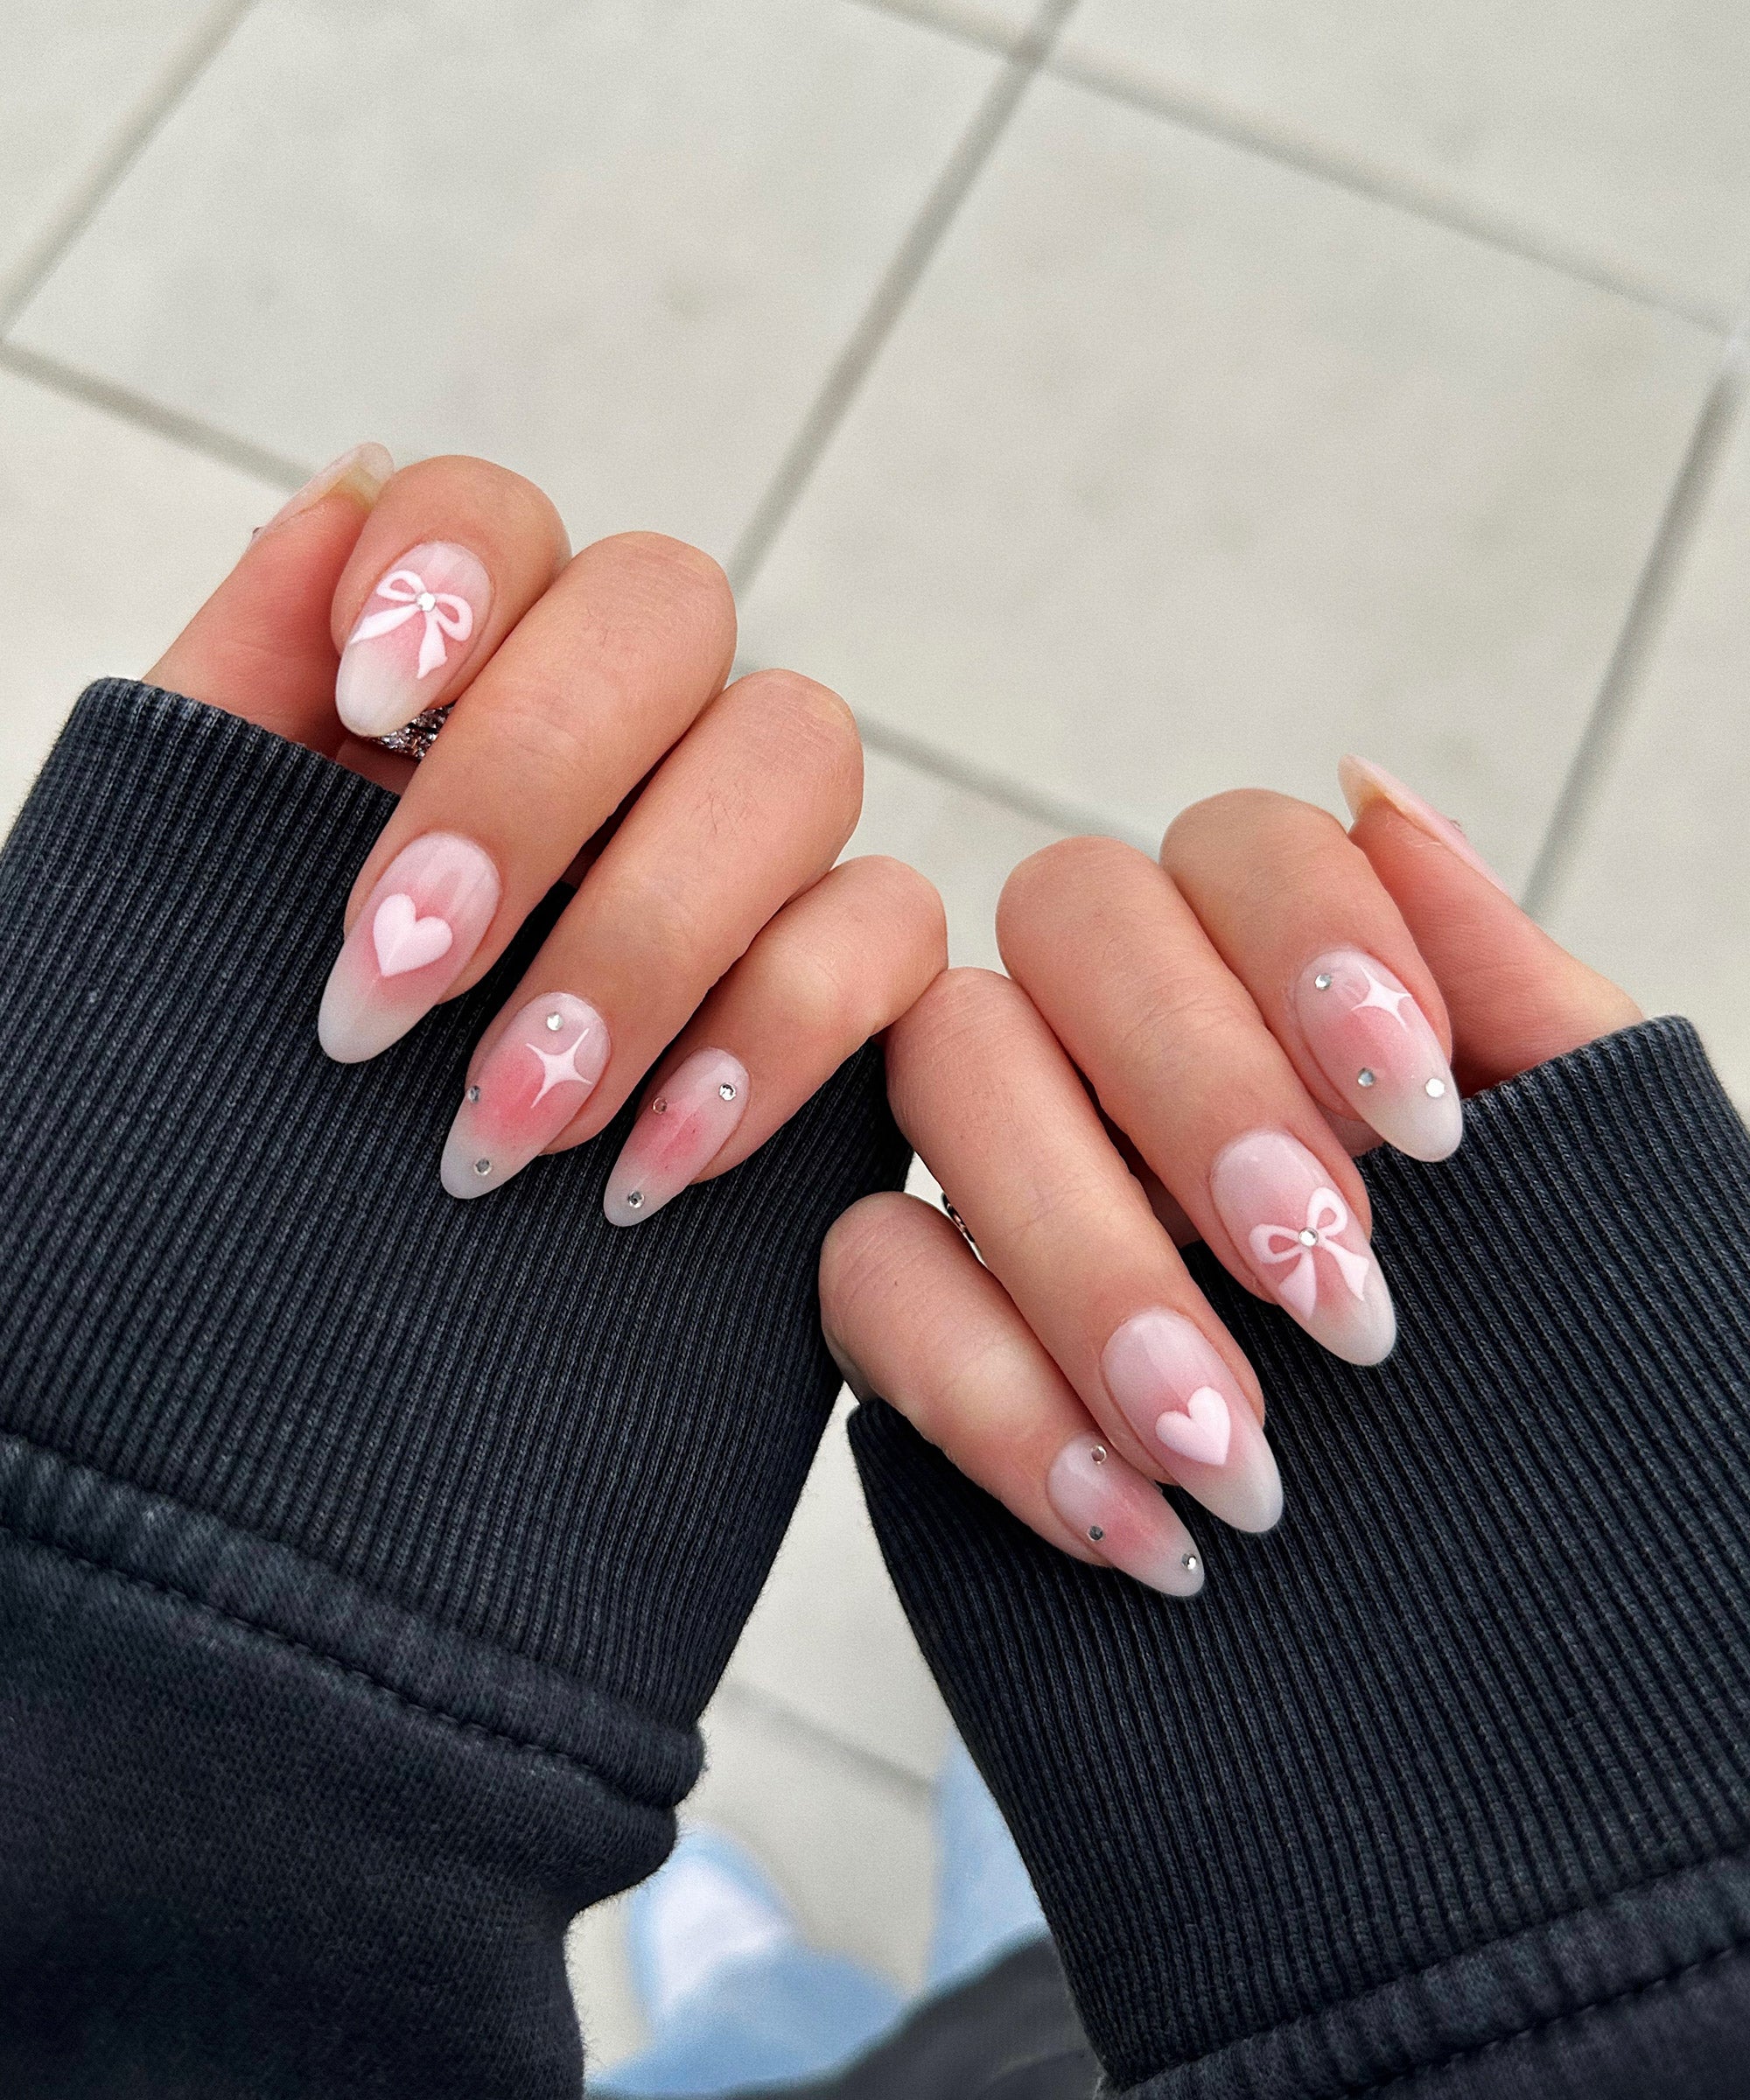 50 Best Winter Nail Art Ideas to Try | Winter nails, Nail designs, Gel nails